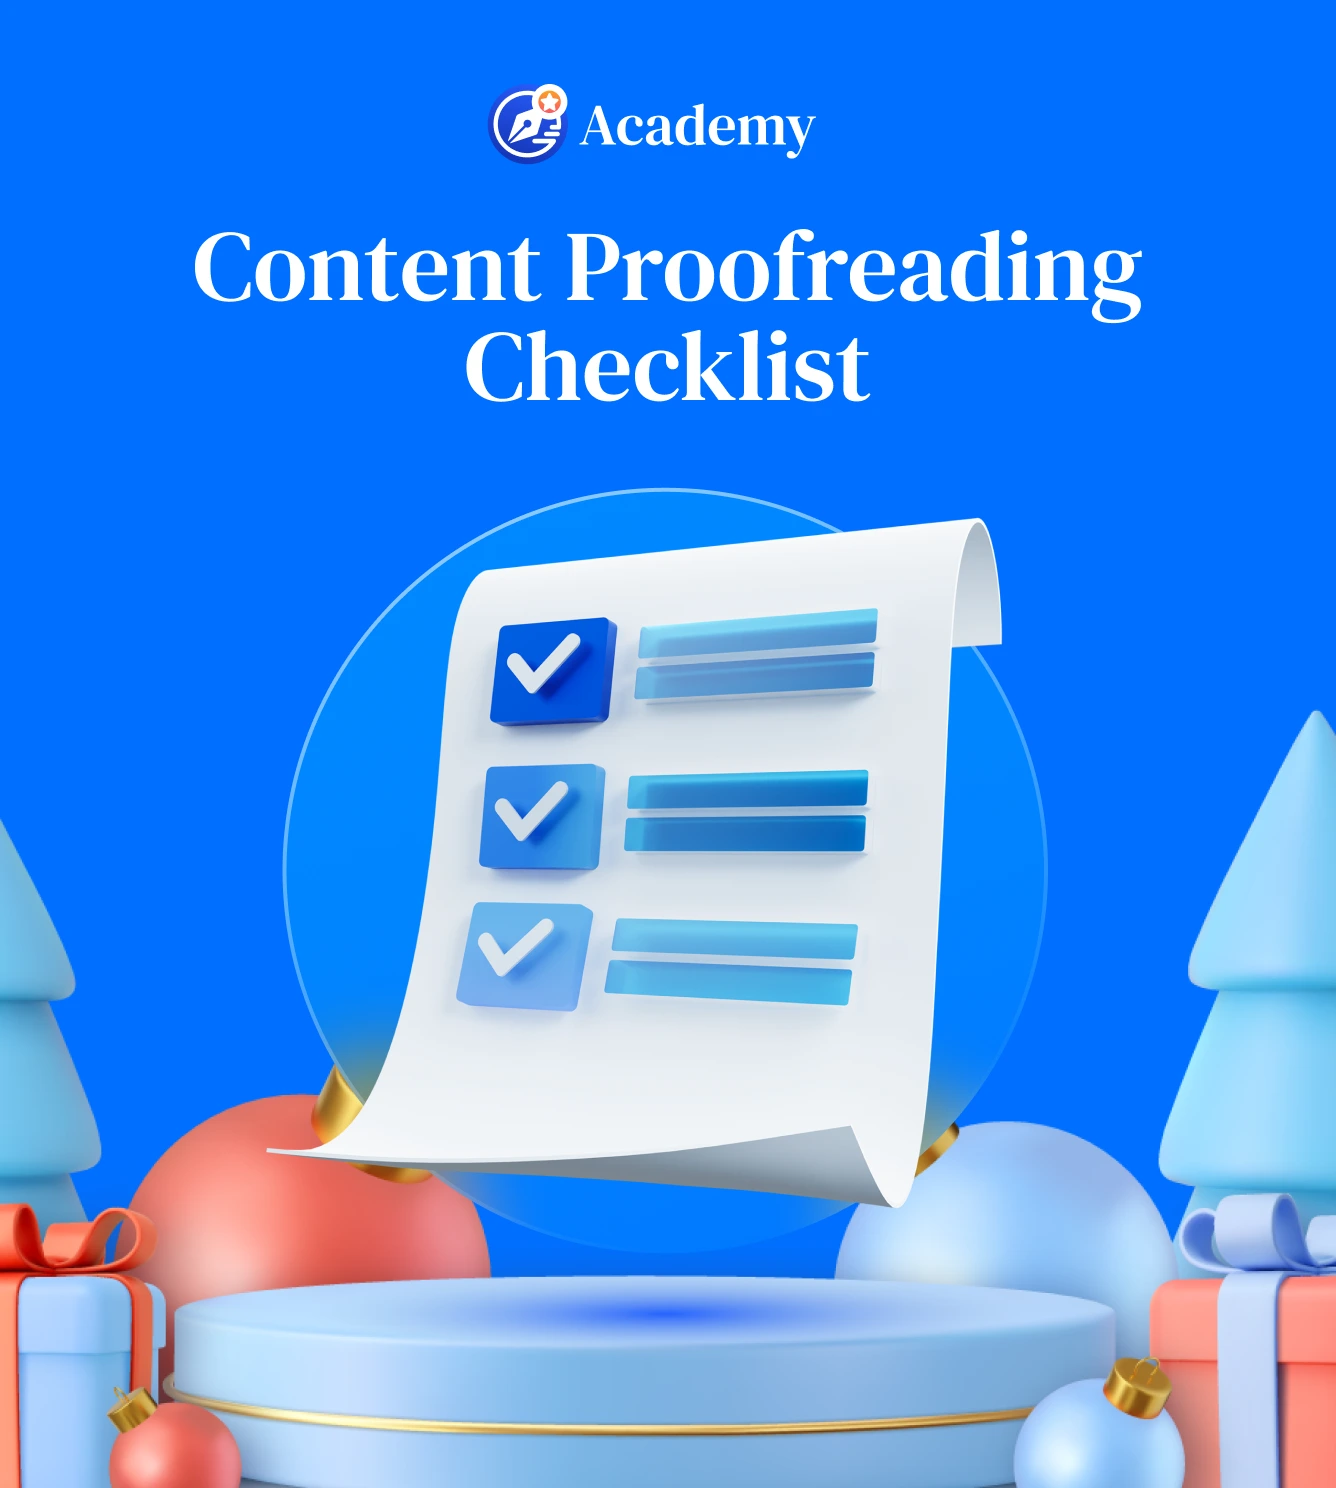 Content Proofreading Checklist